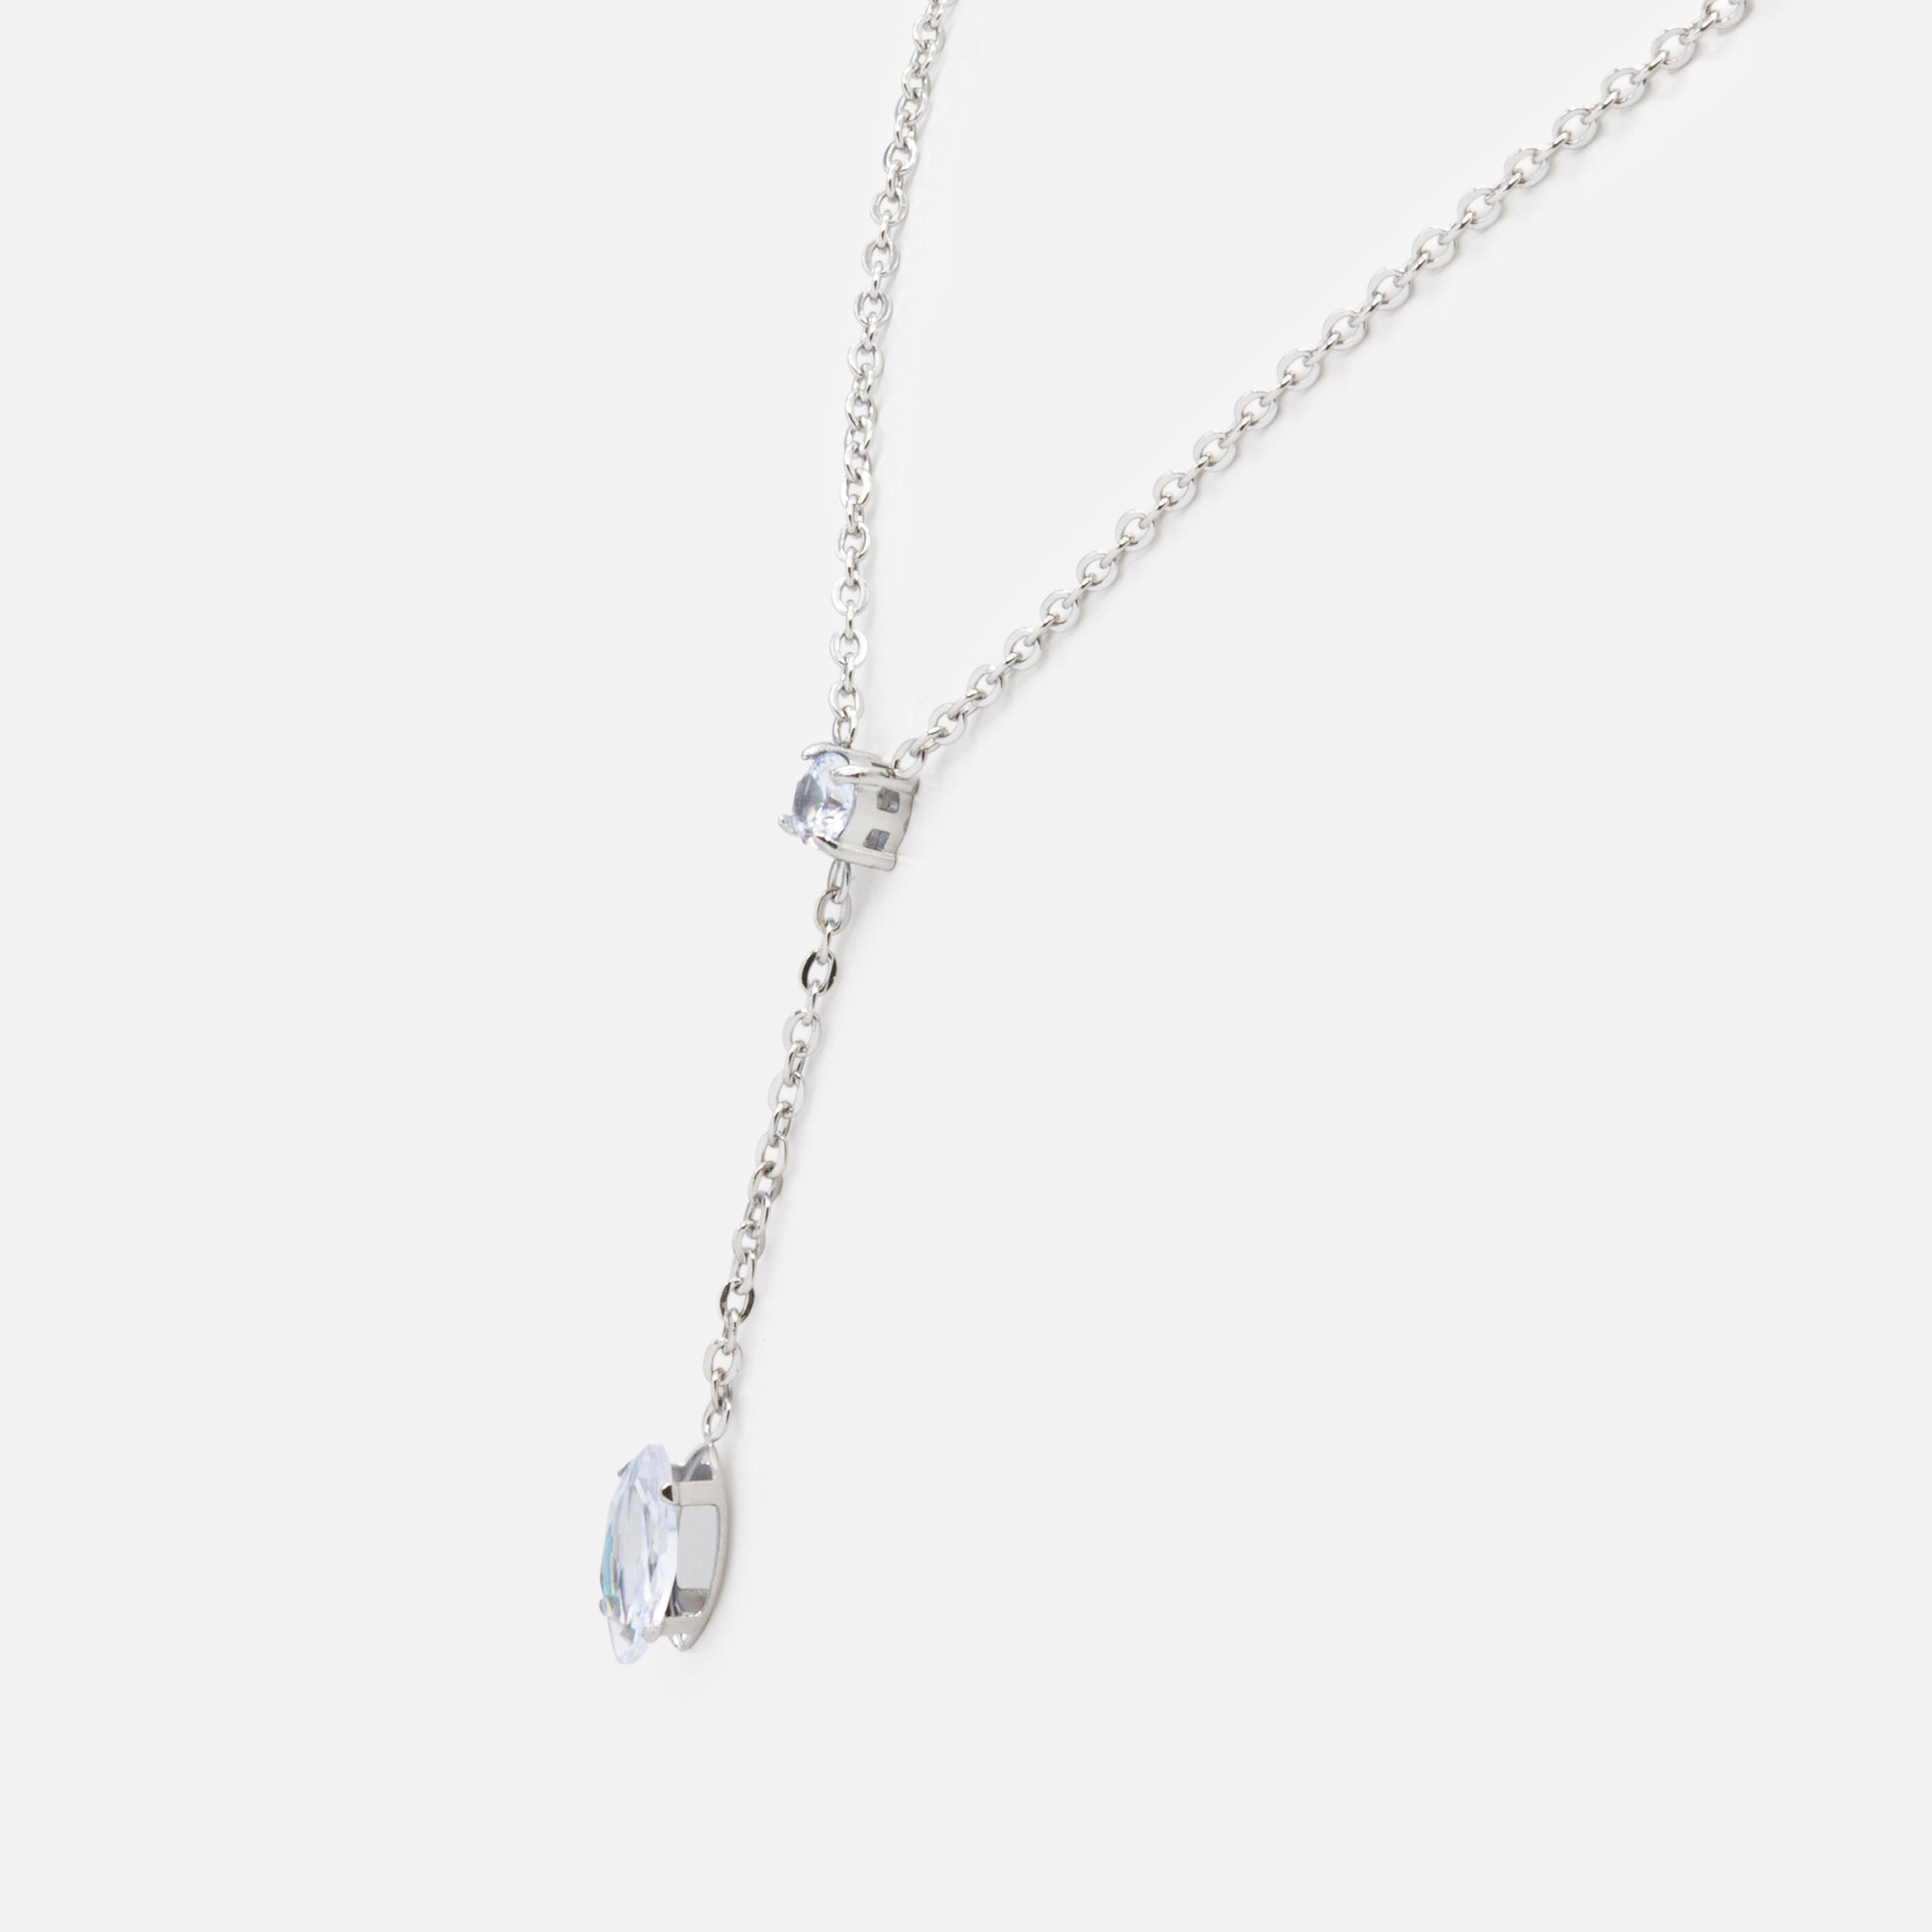 Silver necklace with teardrop cubic zirconia pendant in stainless steel